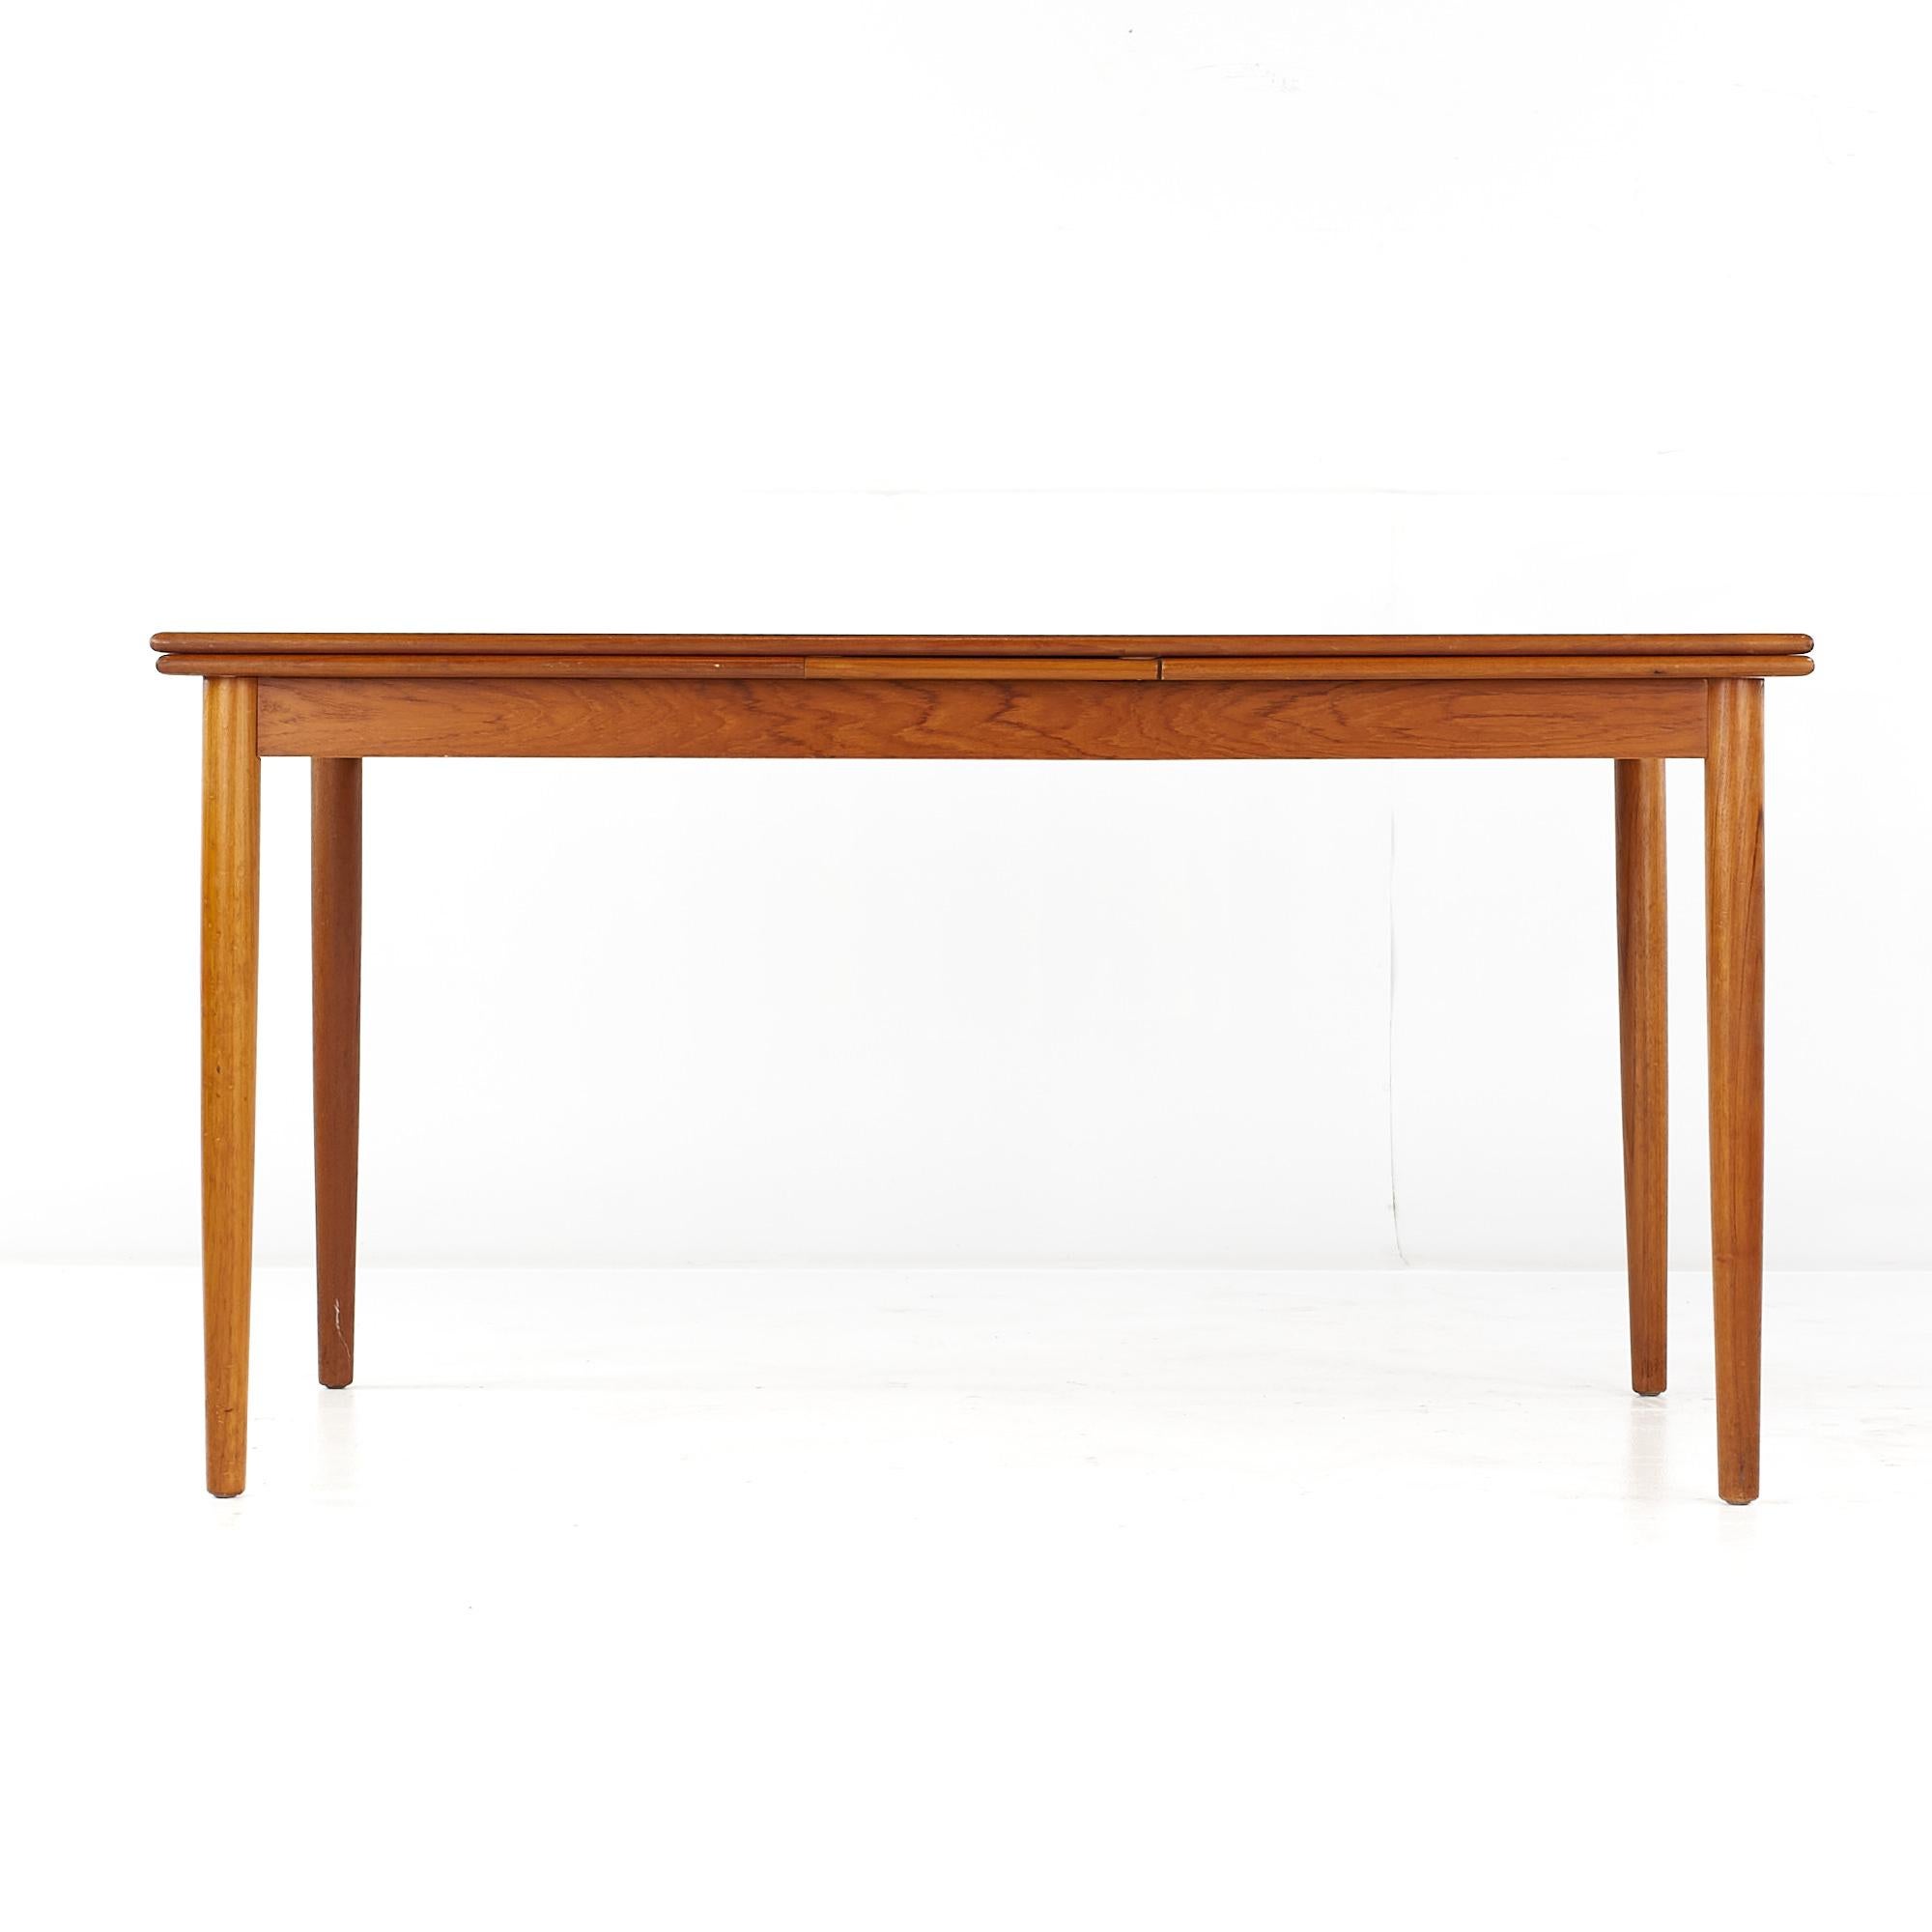 Kurt Ostervig Style Mid Century Teak Hidden Leaf Dining Table

This table measures: 55.25 wide x 34.25 deep x 29.5 high, with a chair clearance of 25 inches
(The extended measurements for this table are pending)

All pieces of furniture can be had